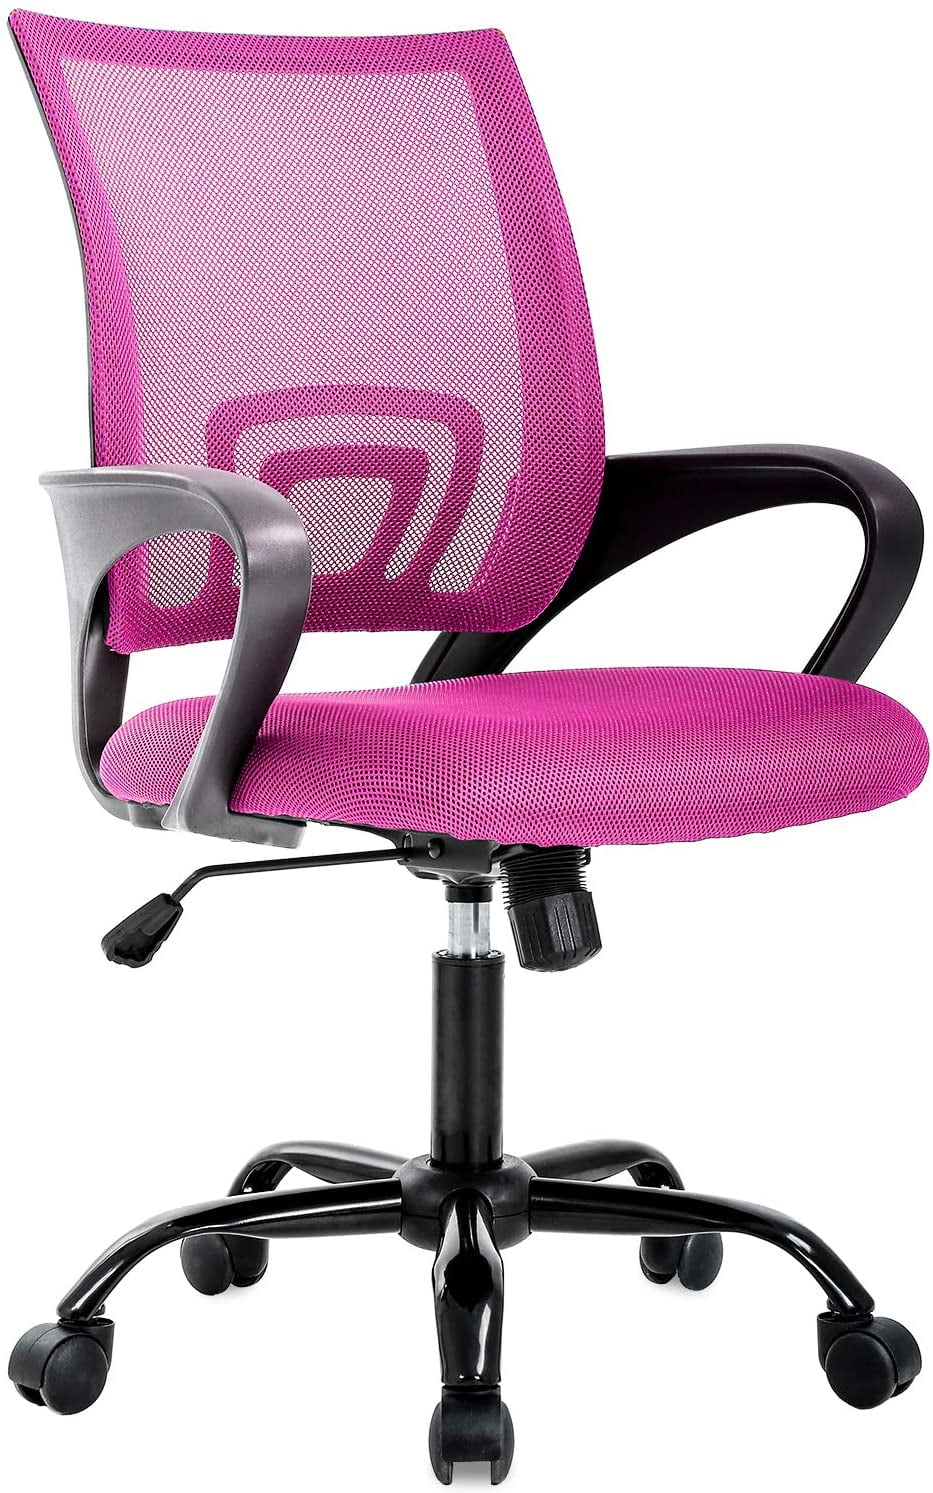 Best Ergonomic Chairs for office or home suitable for pregnant women.   Best ergonomic office chair, Cheap office chairs, Ergonomic office chair